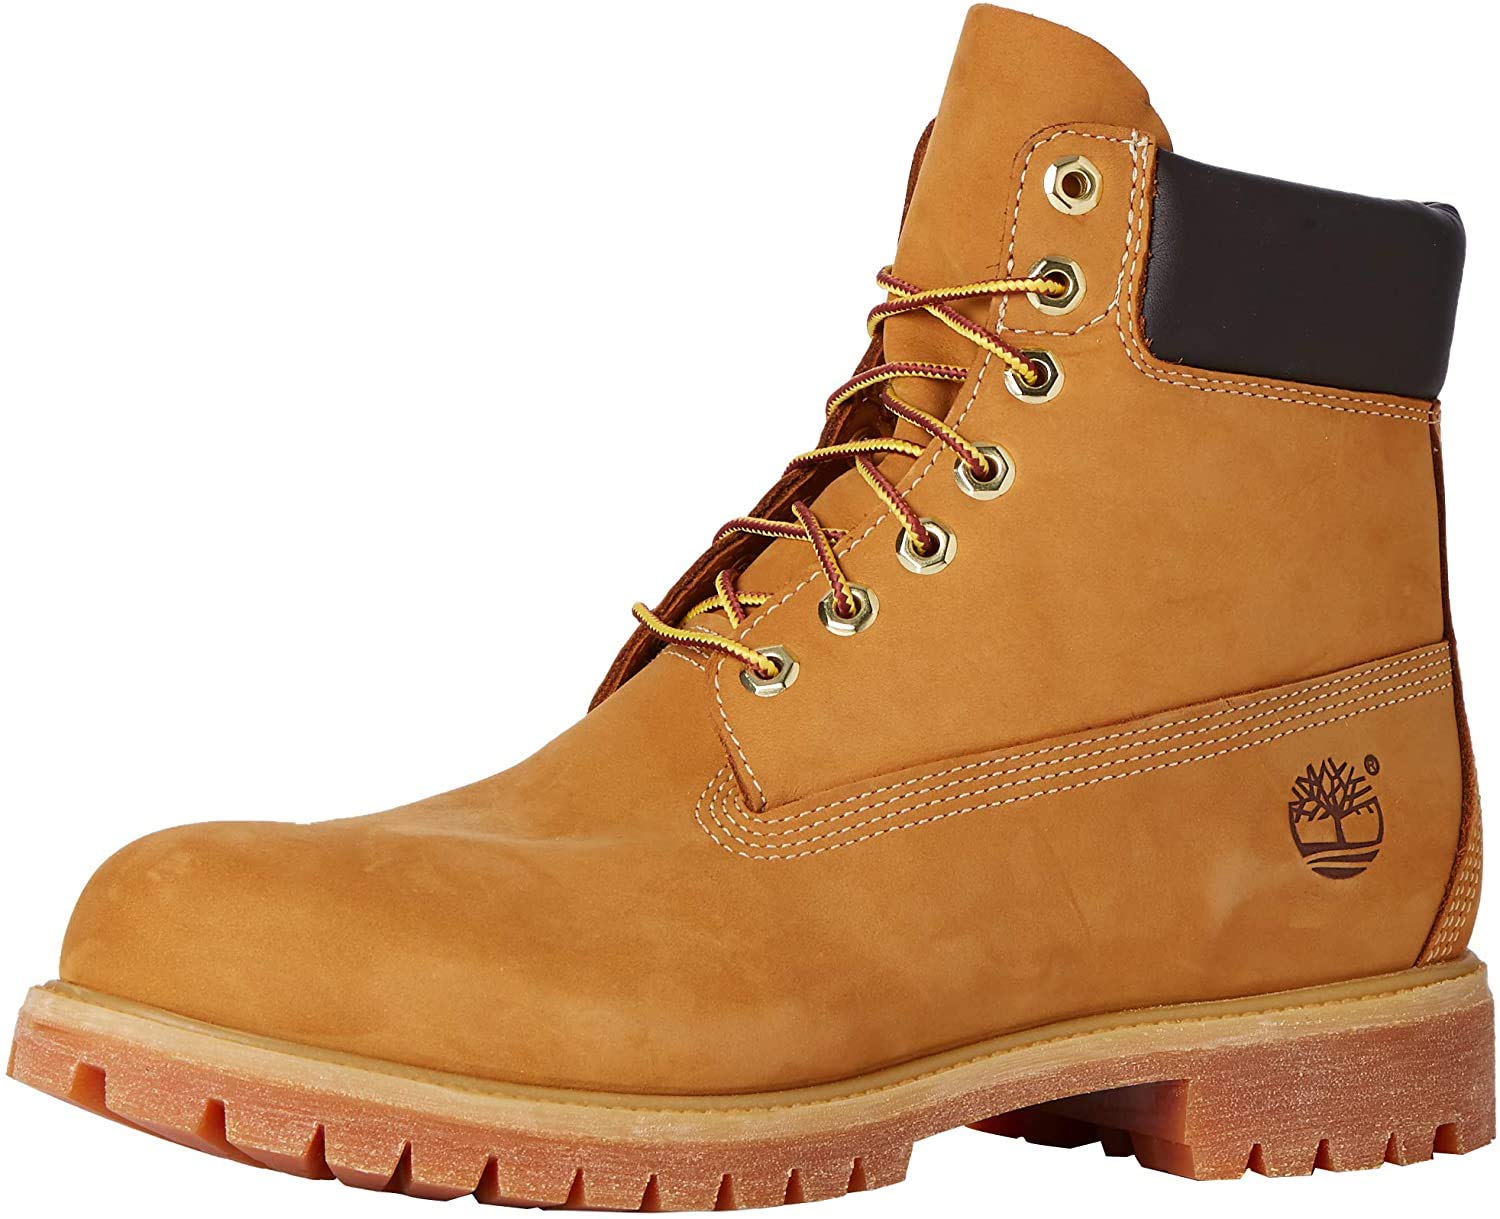 Timberland Men's Ankle Boots, 53 EU